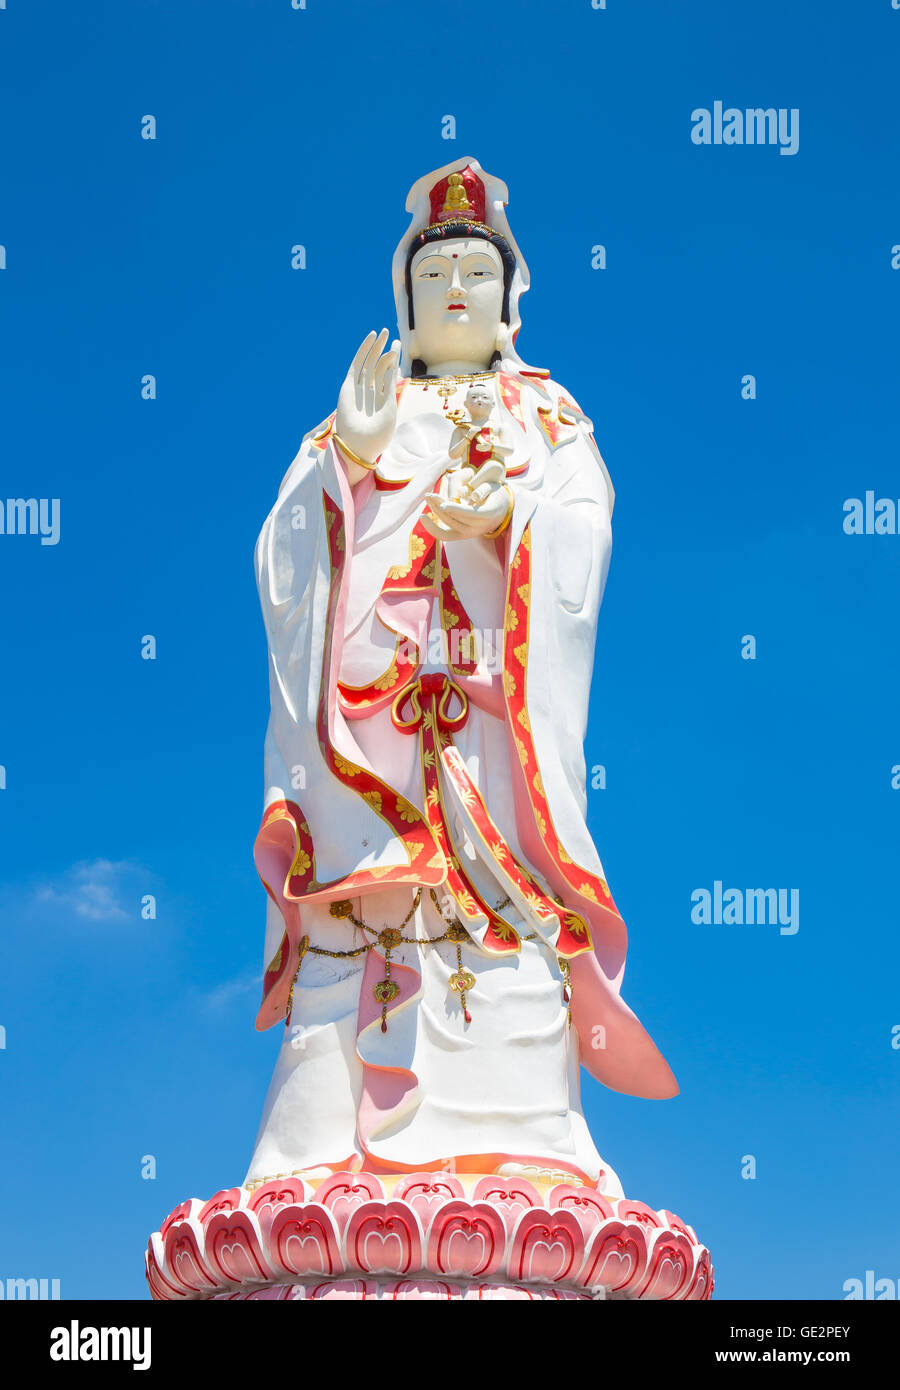 Statue of the Goddess Guanyin on blue sky Stock Photo